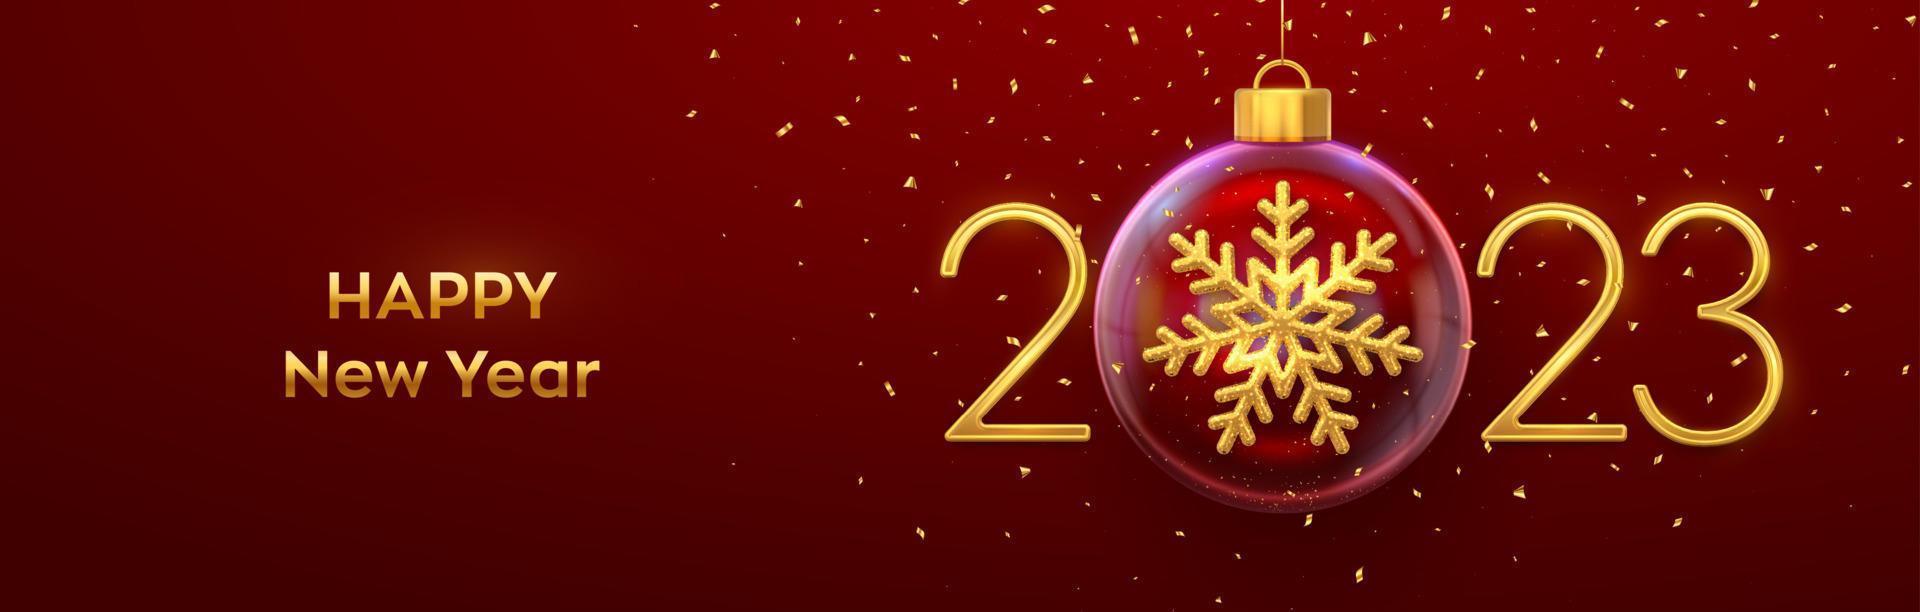 Happy New Year 2023. Golden metal 3D numbers 2023 with gold shining 3D snowflake in a Christmas glass bauble. Greeting card. Holiday Xmas and New Year poster, banner, flyer. Vector Illustration.